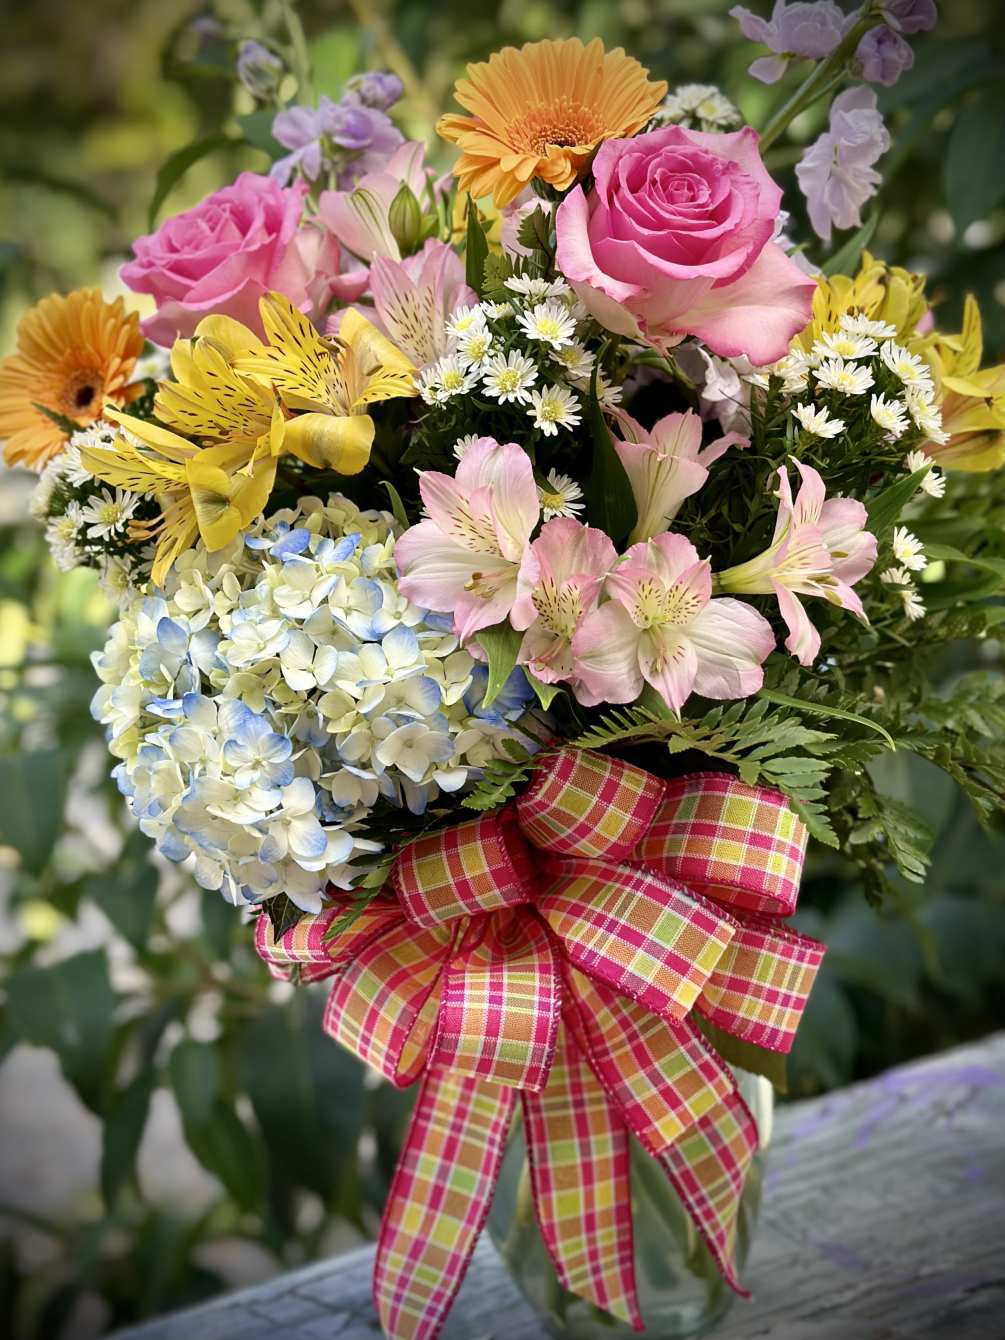 Introducing our vibrant masterpiece, the &#039;Sunshine Serenade Bouquet.&#039; Bursting with the radiance